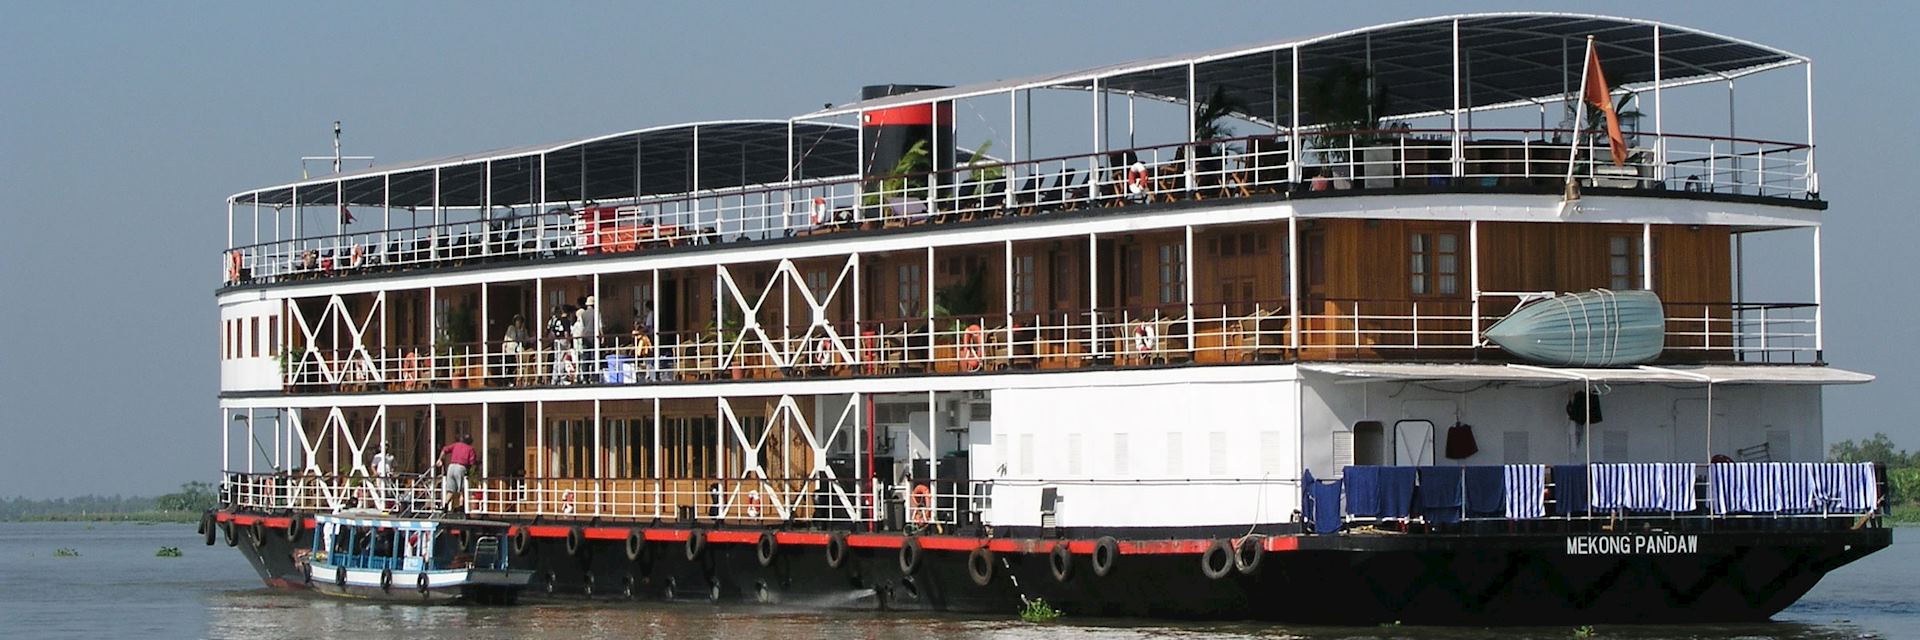 Cruising The Mekong with Audley Travel